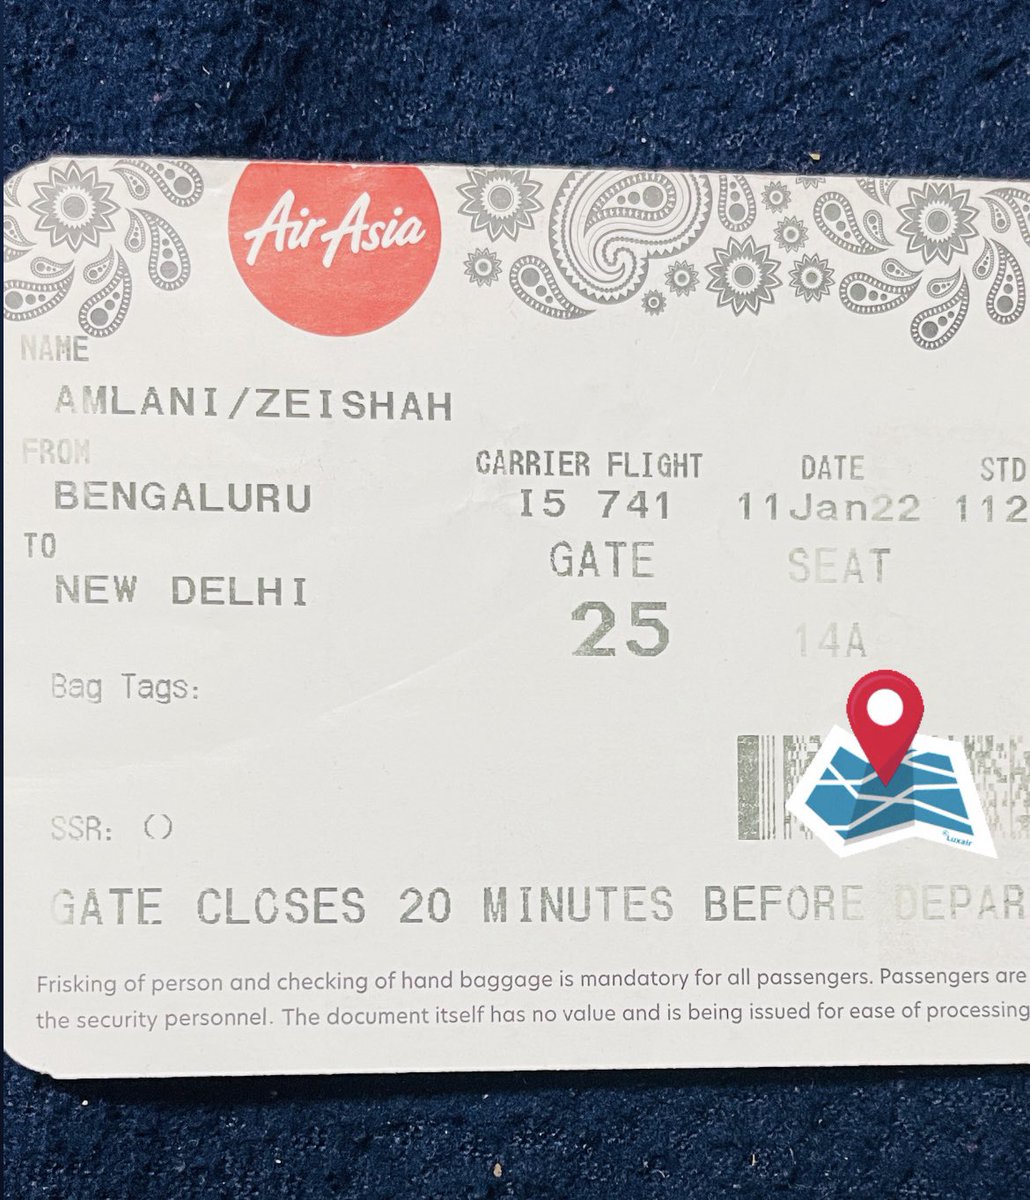 Going to treat Twitter like LinkedIn with a #professionalupdate also life update.

A year ago I took a leap of faith & bought a 1 way ticket to Delhi. 
Leaving everything I loved & trusted behind in Bangalore. 

Finished a year in Delhi NCR. 
Finished a year at Lallantop. 

1/2